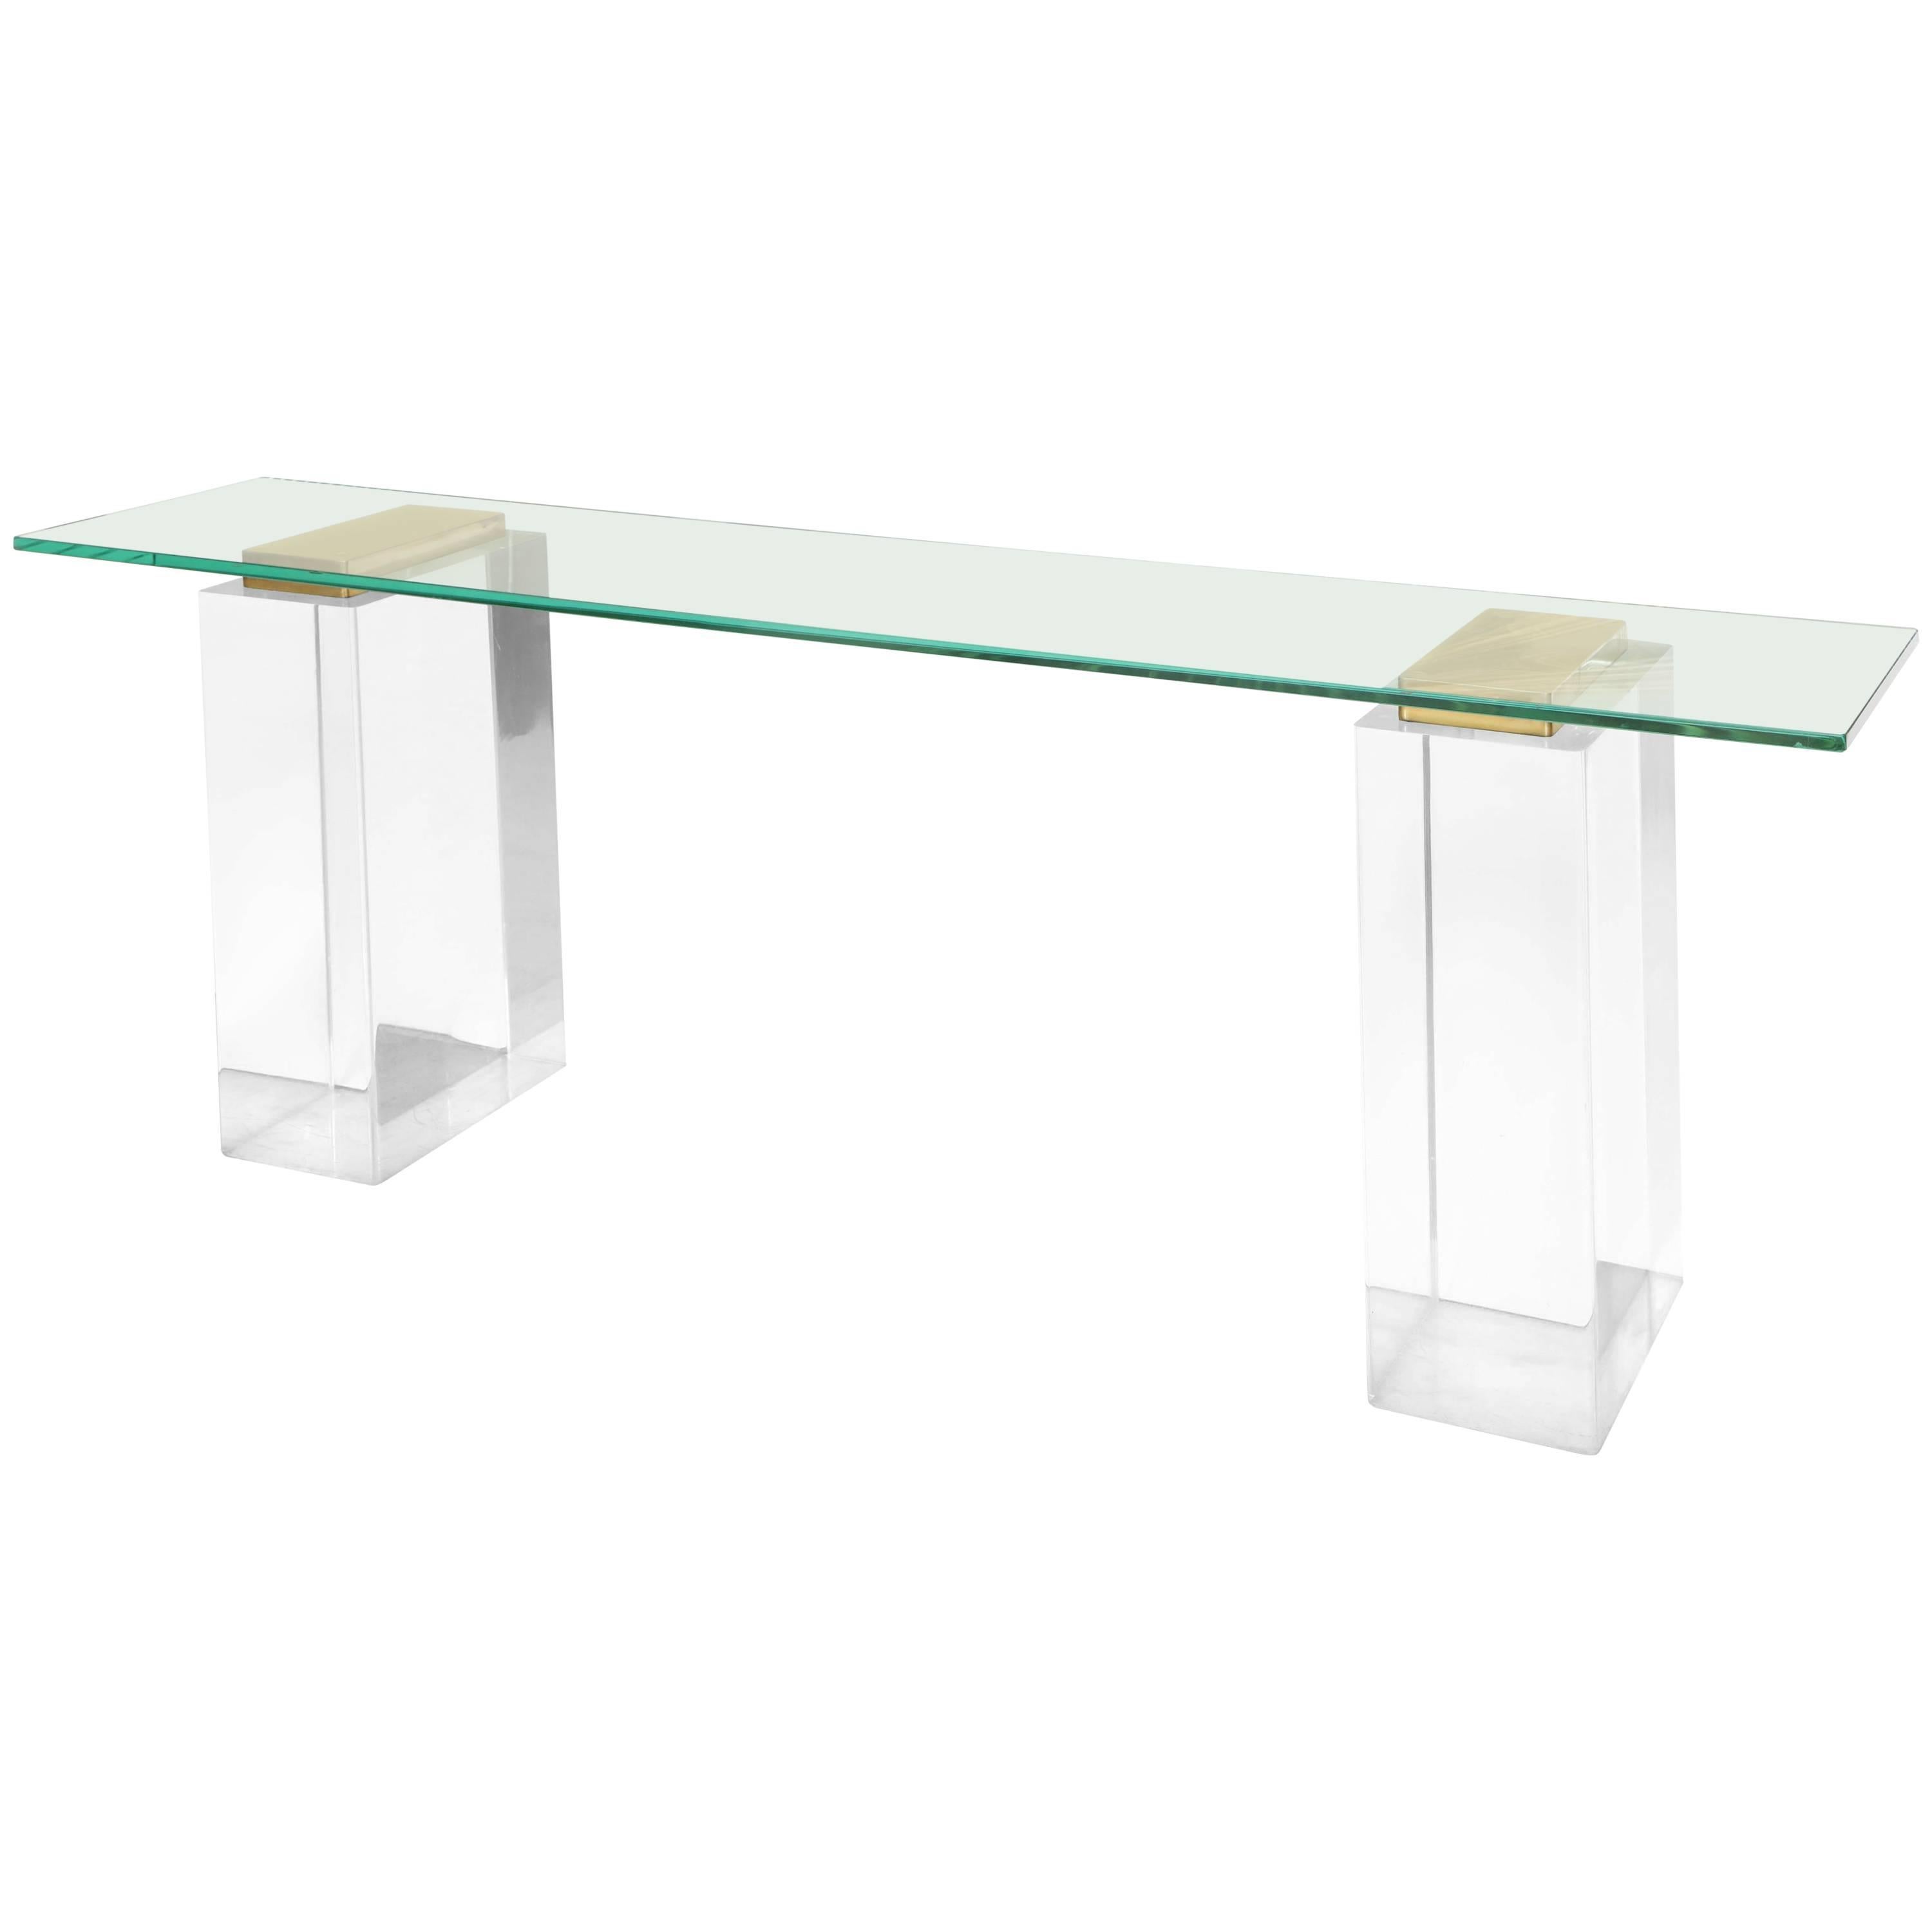 Lucite Console Table with Massive Solid Lucite Columns